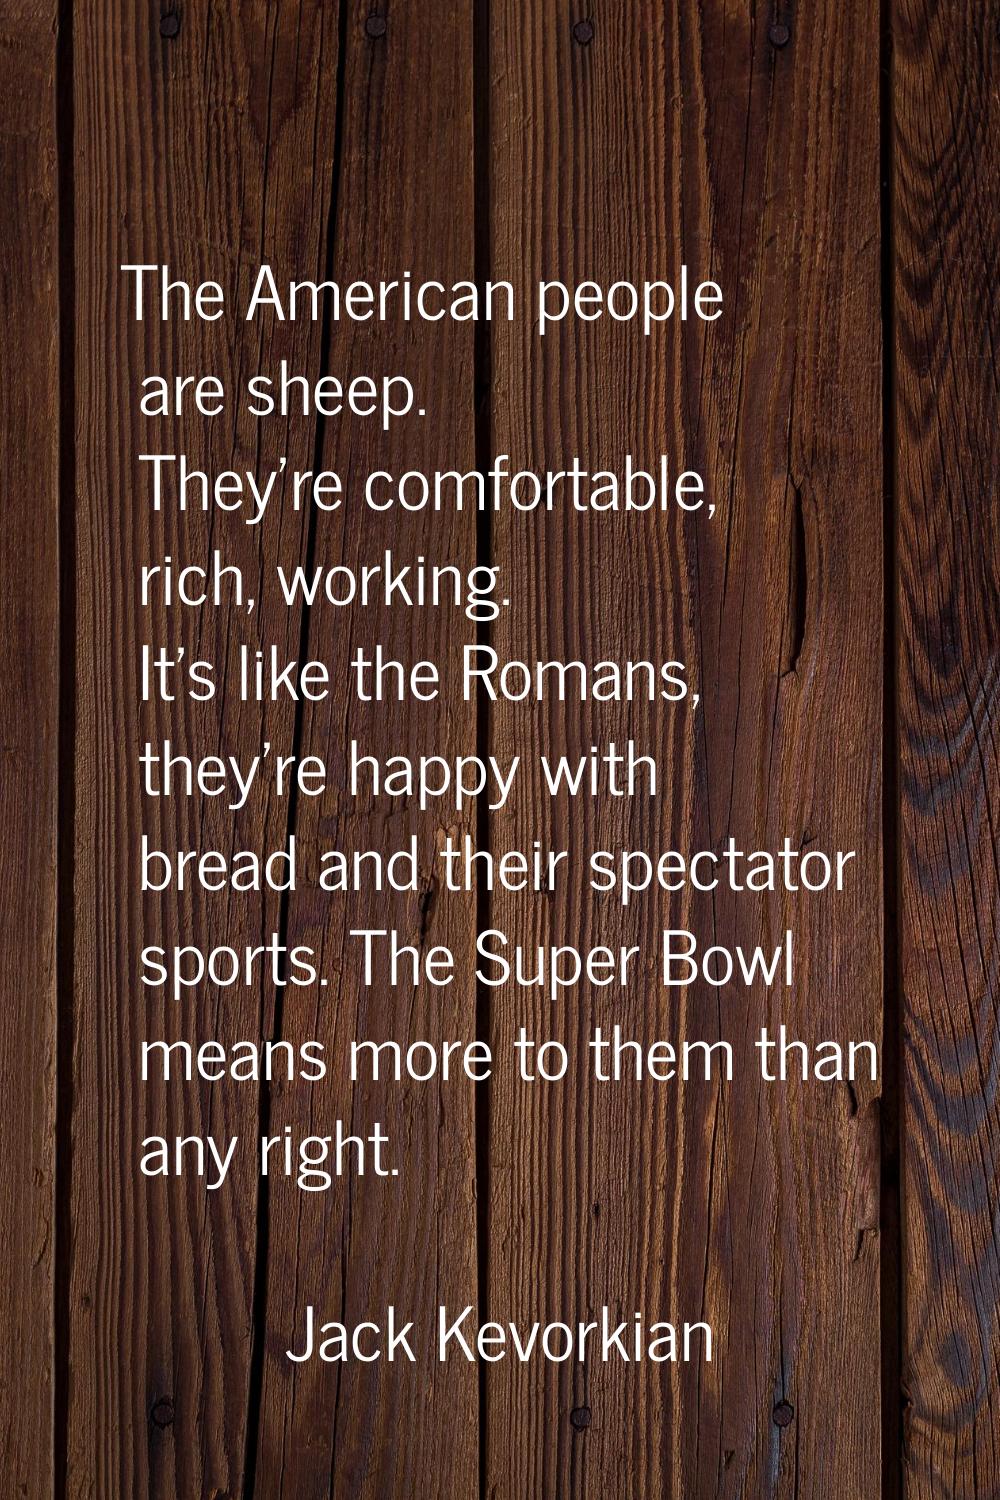 The American people are sheep. They're comfortable, rich, working. It's like the Romans, they're ha